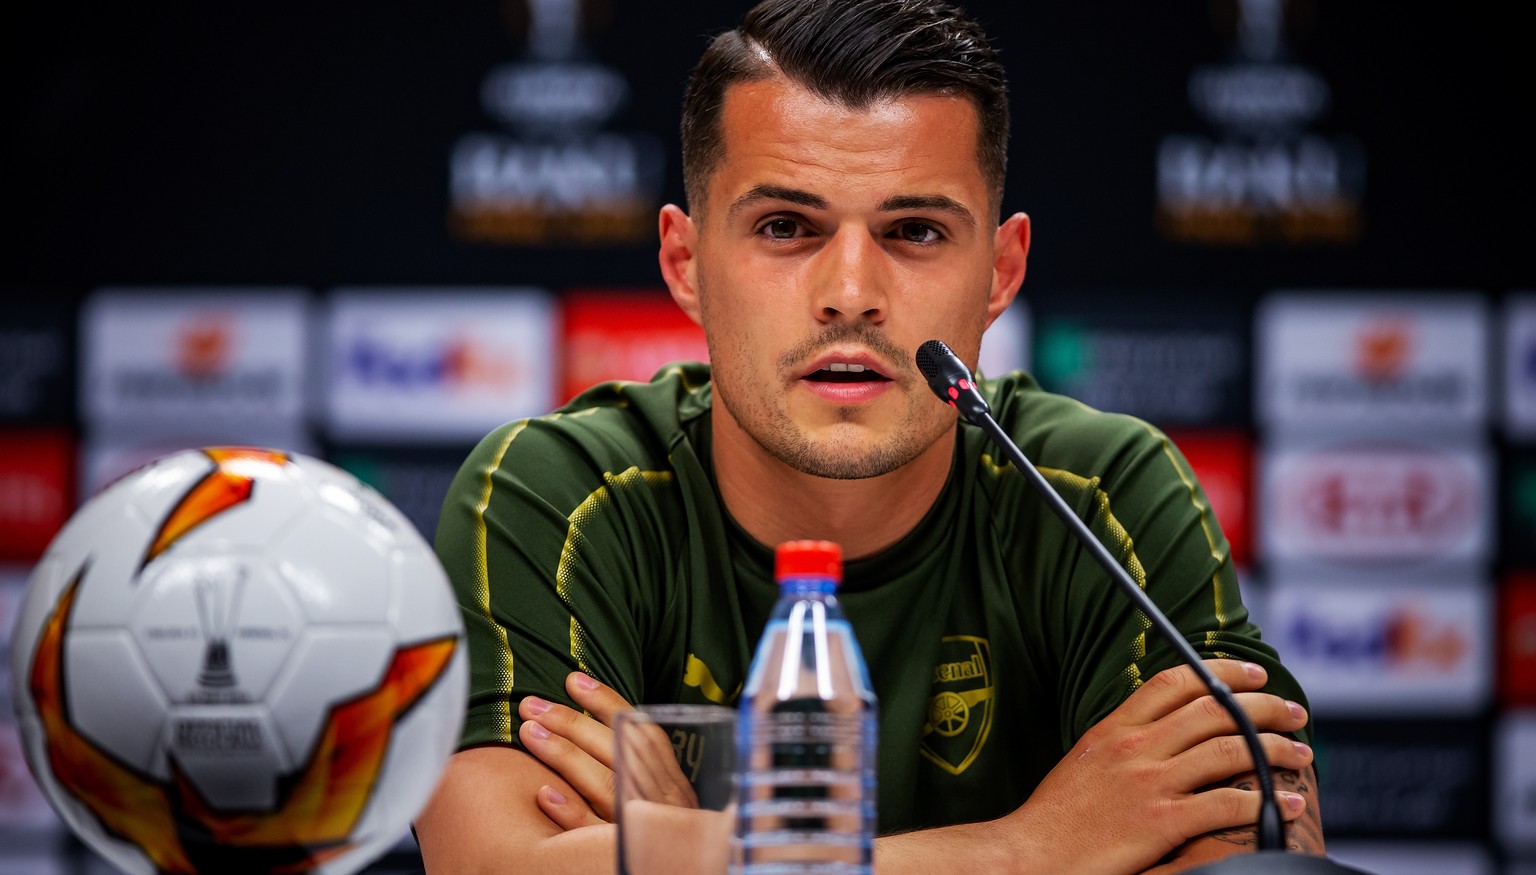 epa07608396 A handout provided by UEFA shows Granit Xhaka of Arsenal during a press conference at the Olympic Stadium in Baku, Azerbaijan, 28 May 2019. Arsenal will play Chelsea in the UEFA Europa Lea ...